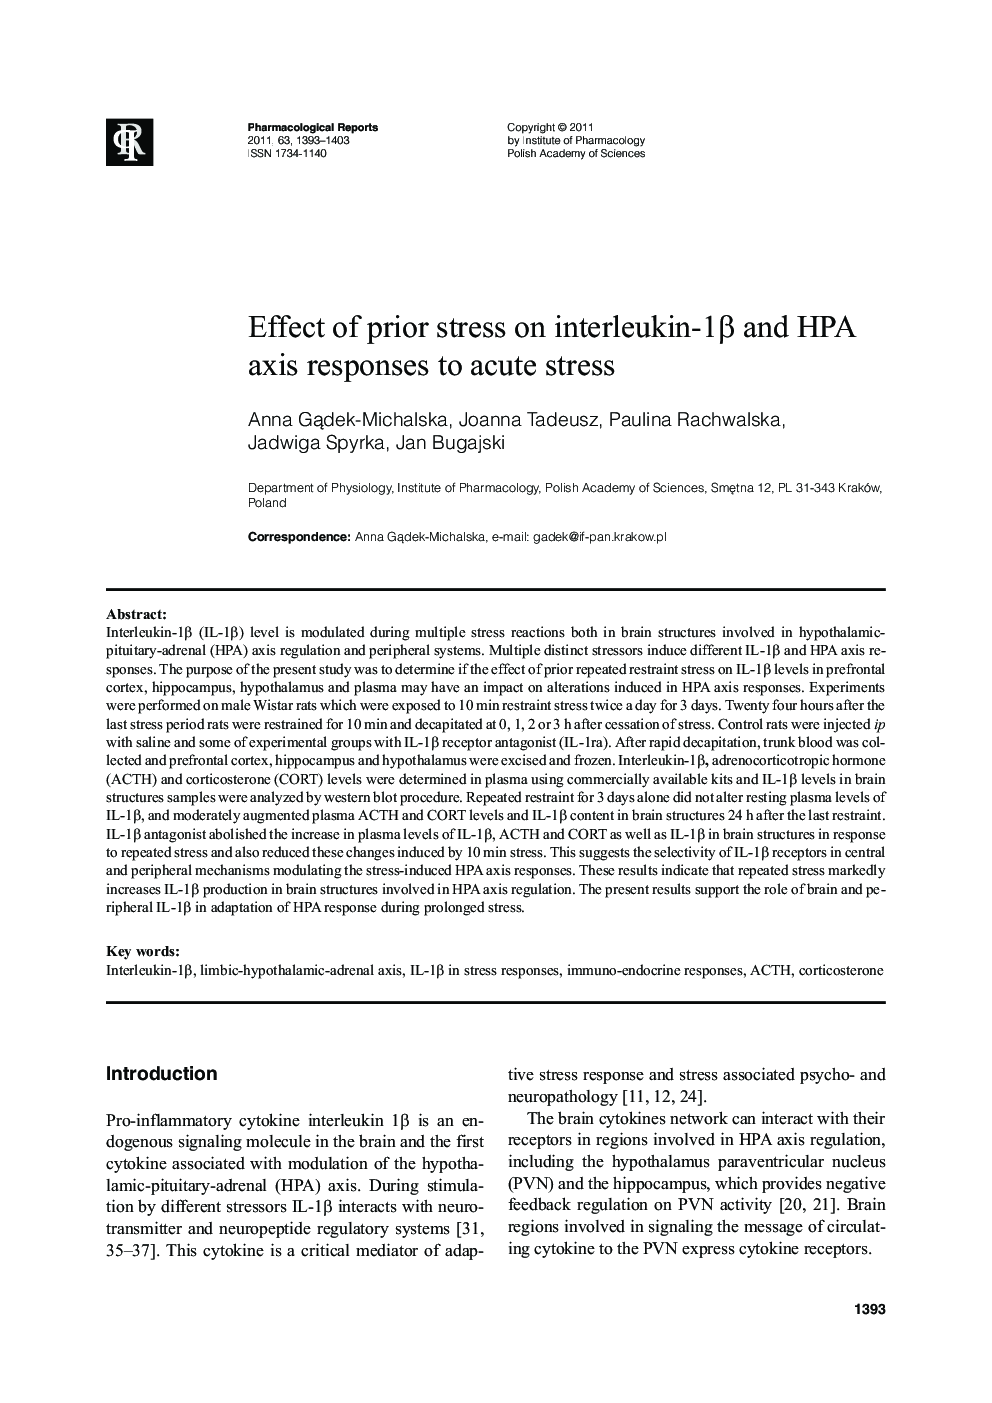 Effect of prior stress on interleukin-1β and HPA axis responses to acute stress